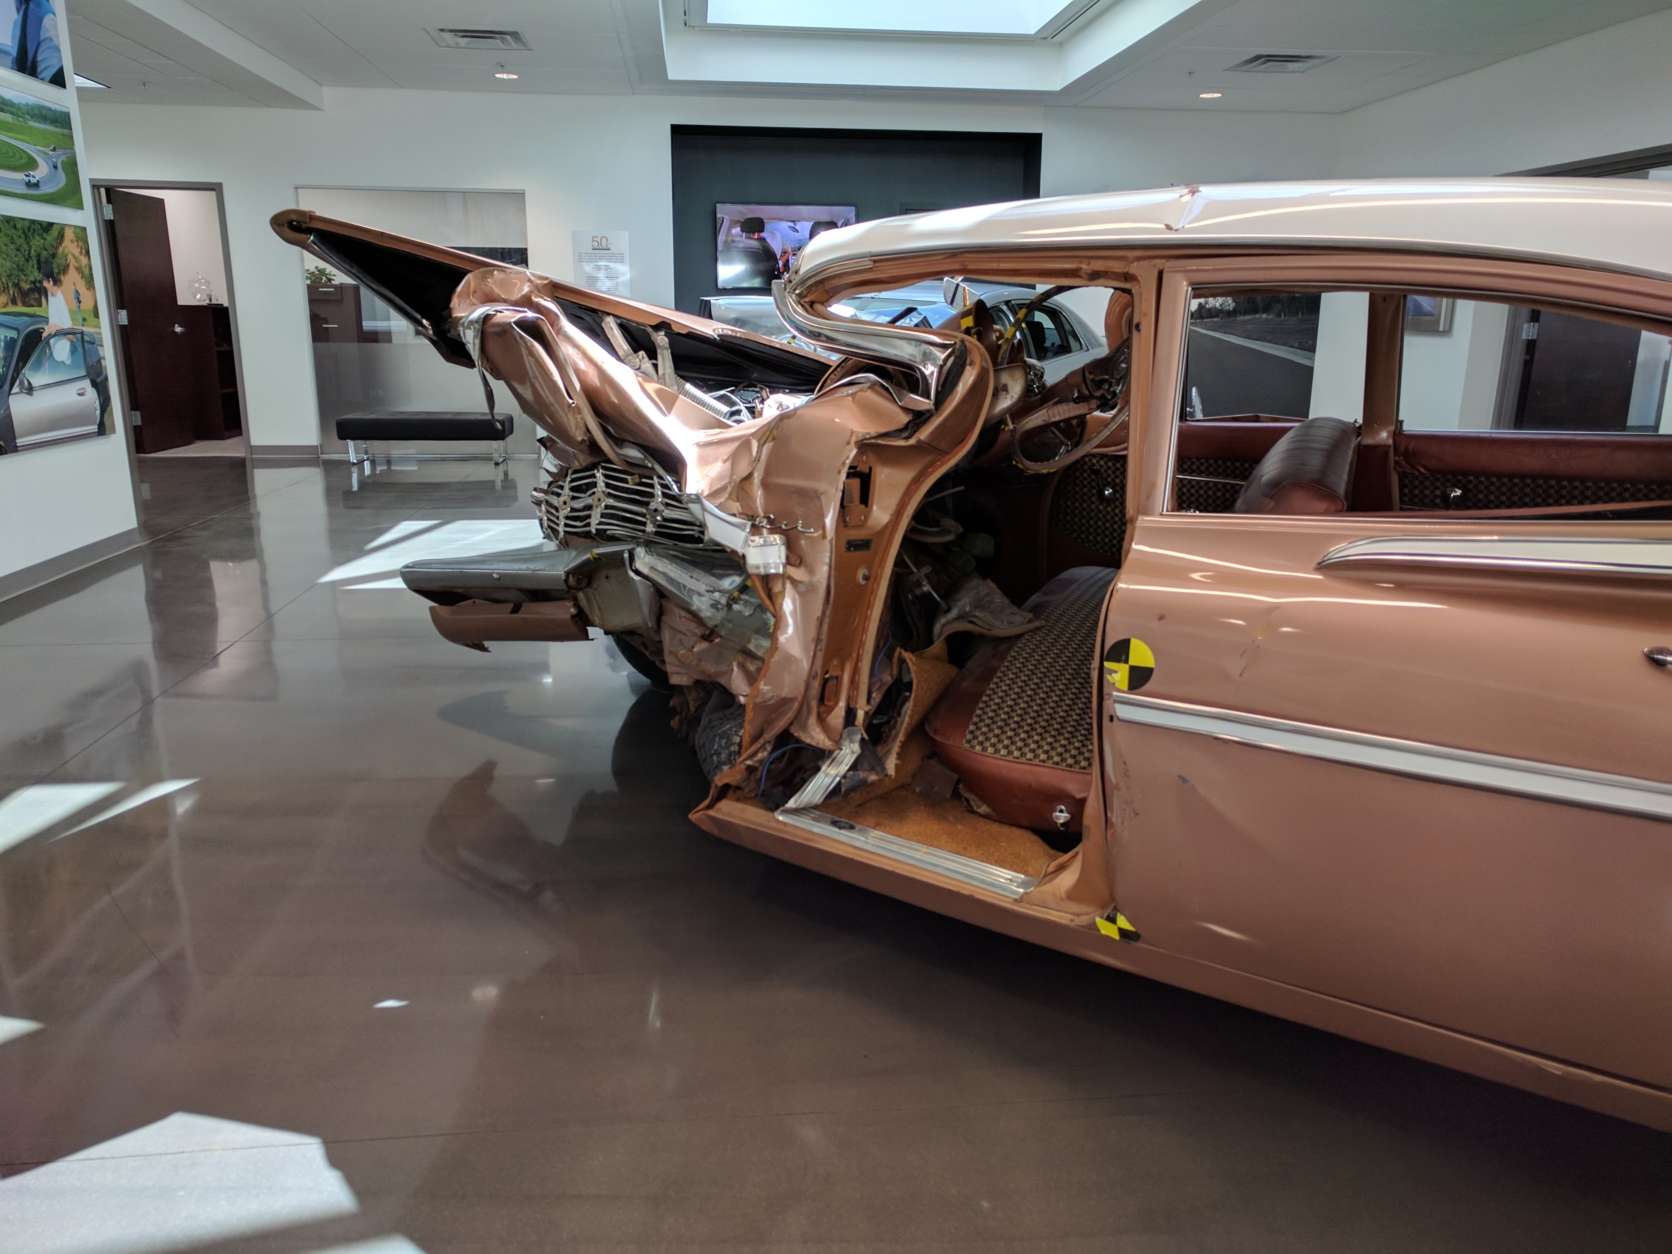 A 1959 Chevrolet Bel Air and a 2009 Chevrolet Malibu are on display in the IIHS Vehicle Research Center's lobby, demonstrating the advances in vehicle safety over the last several decades. (WTOP/Ginger Whitaker)